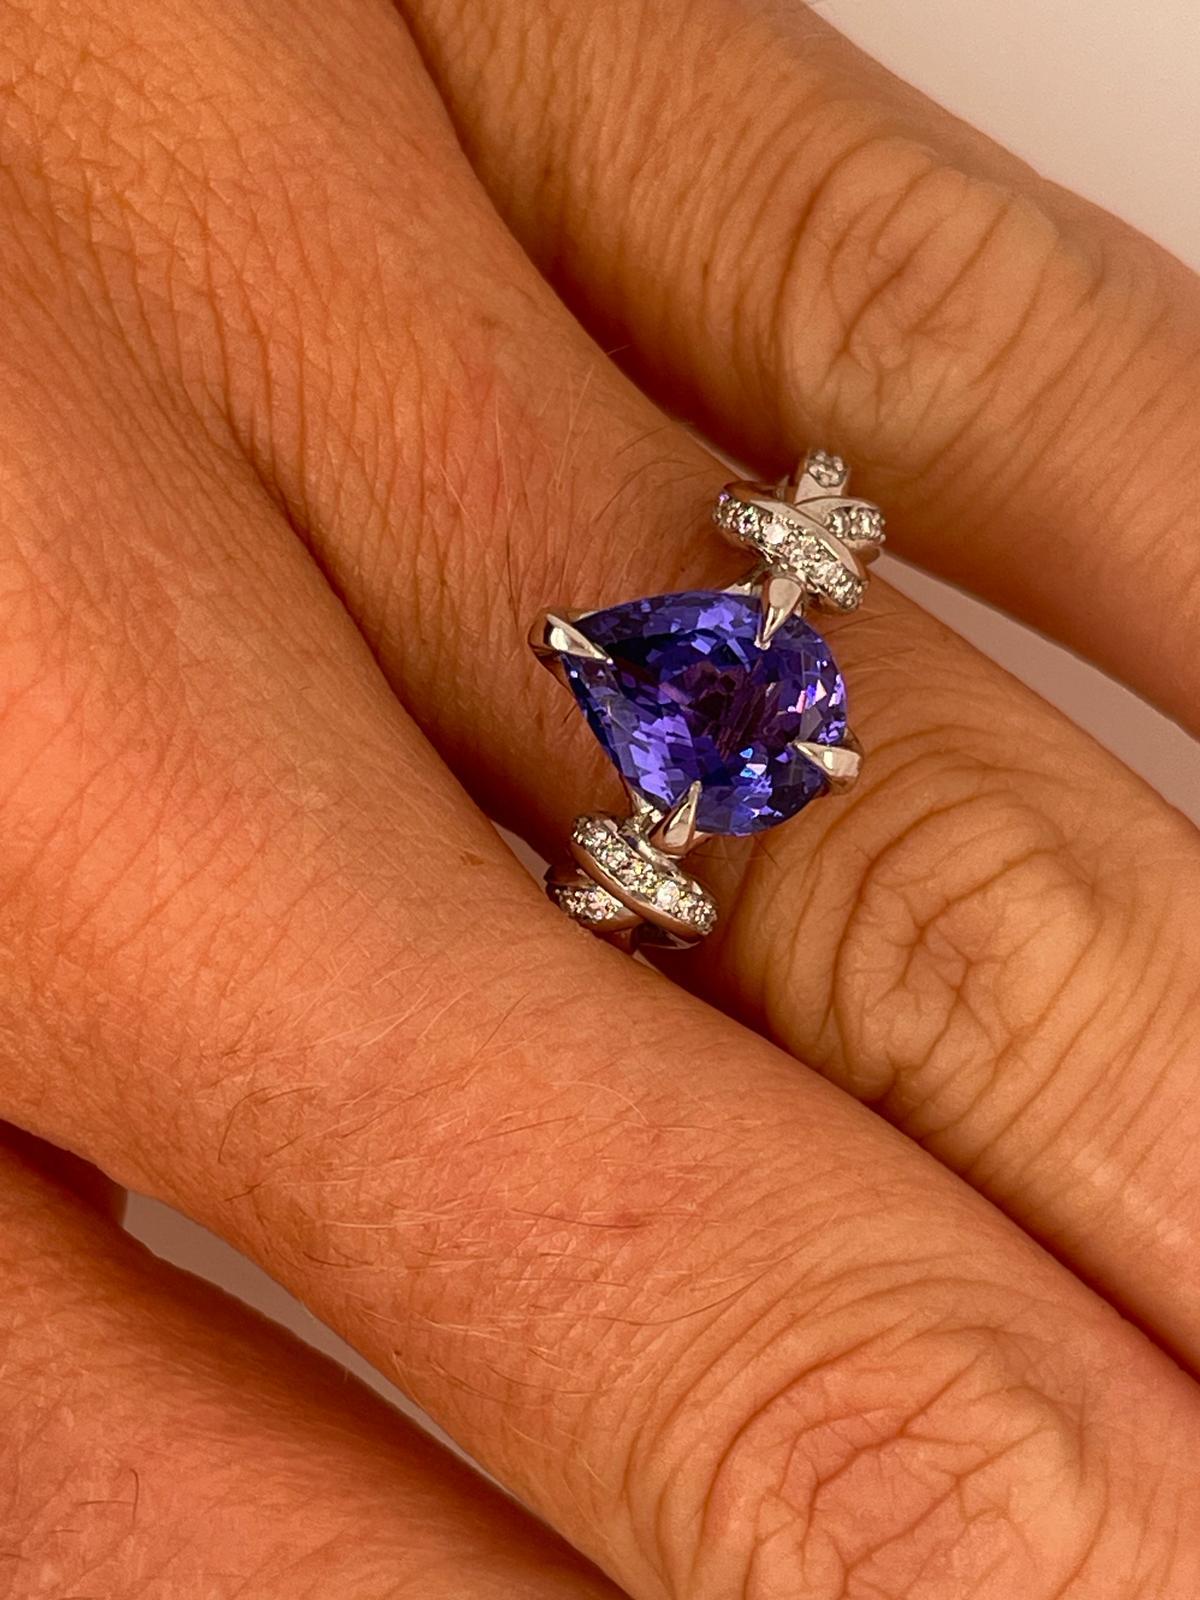 For Sale:  2ct tanzanite and diamond ring in platinum and rose gold  Forget me knot ring  10